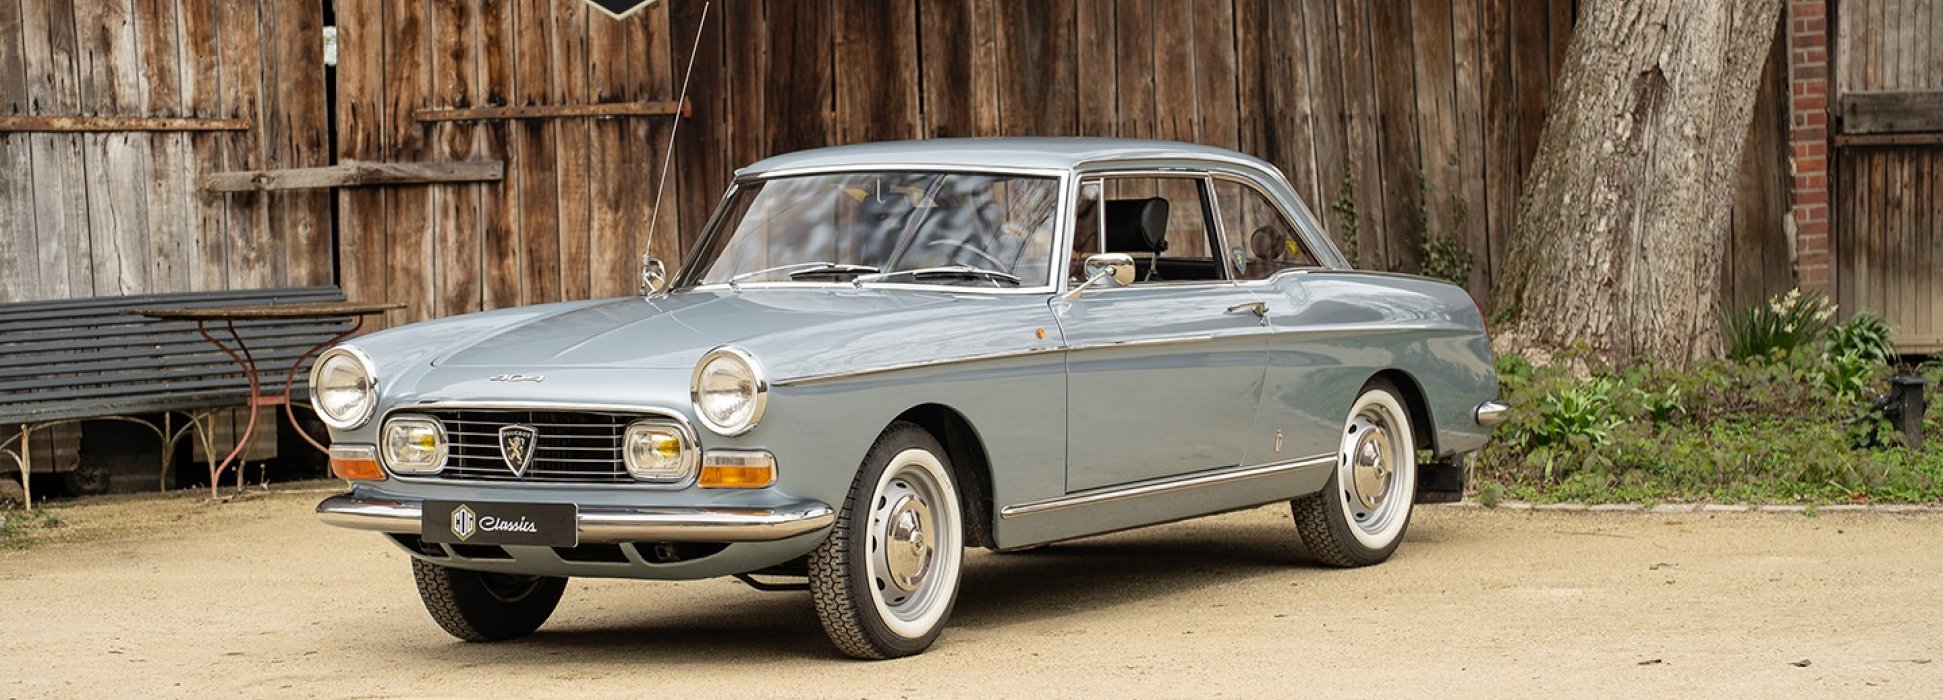 Peugeot 404 Coupe 1